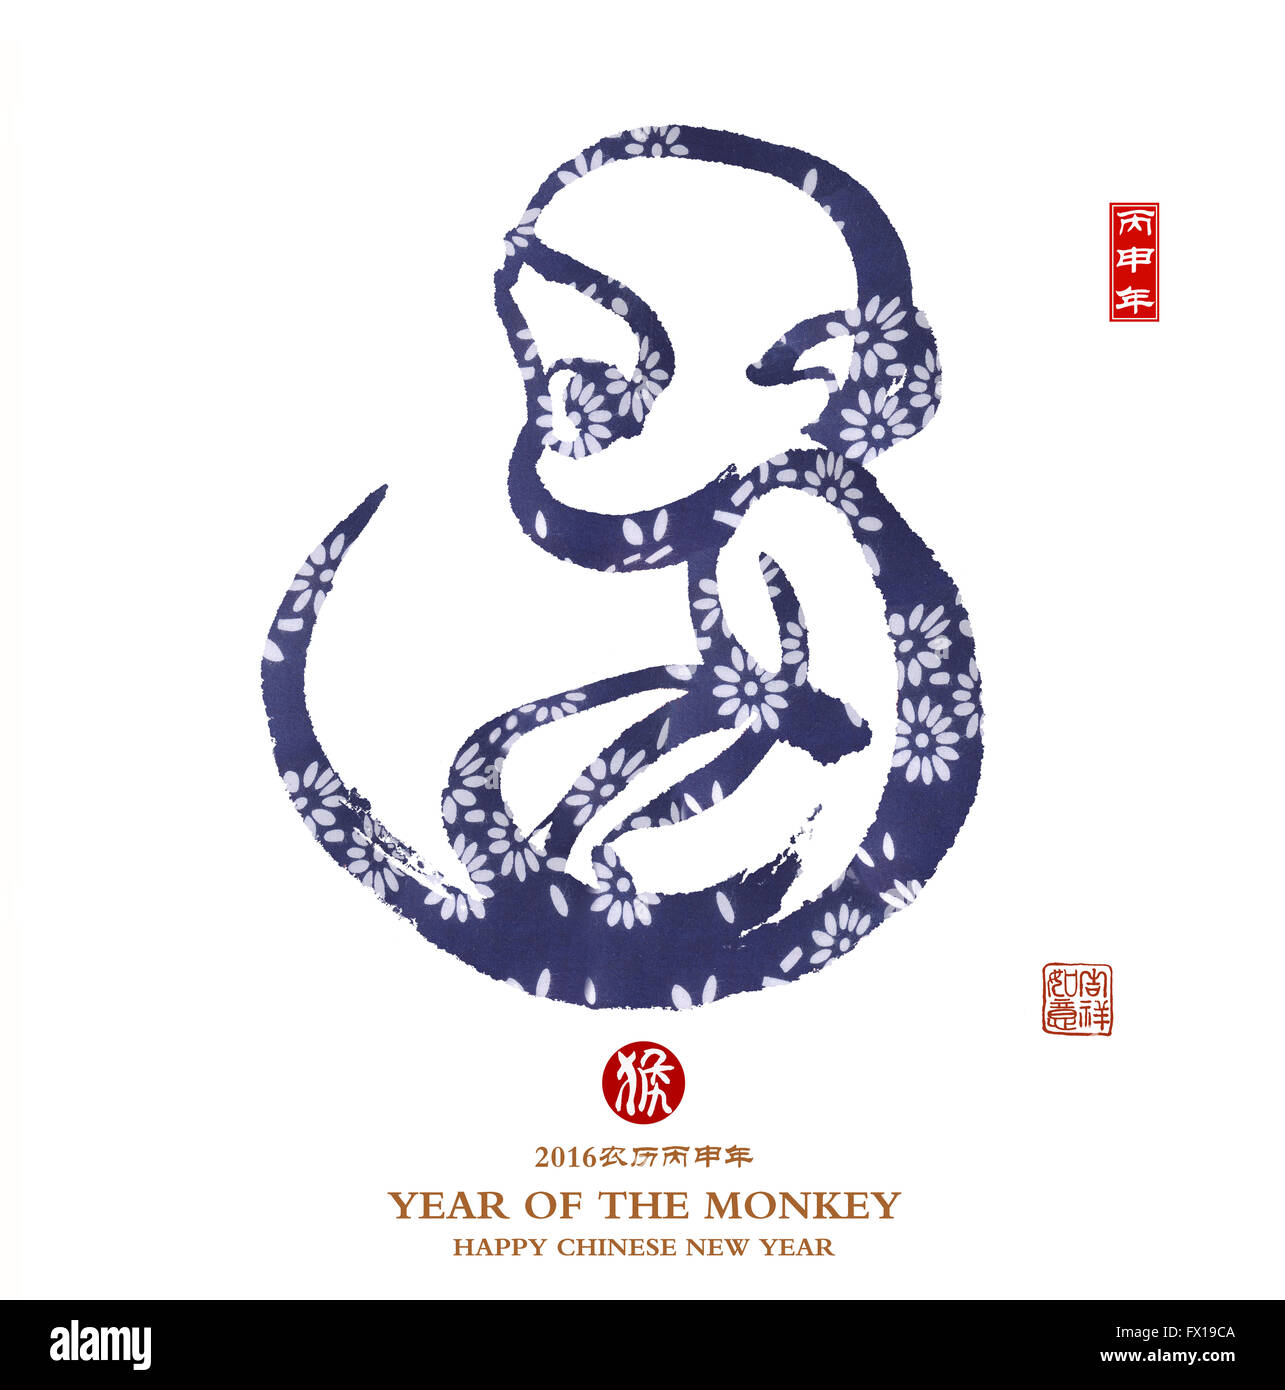 2016 Chinese Lunar New Year of the Monkey Stockfoto